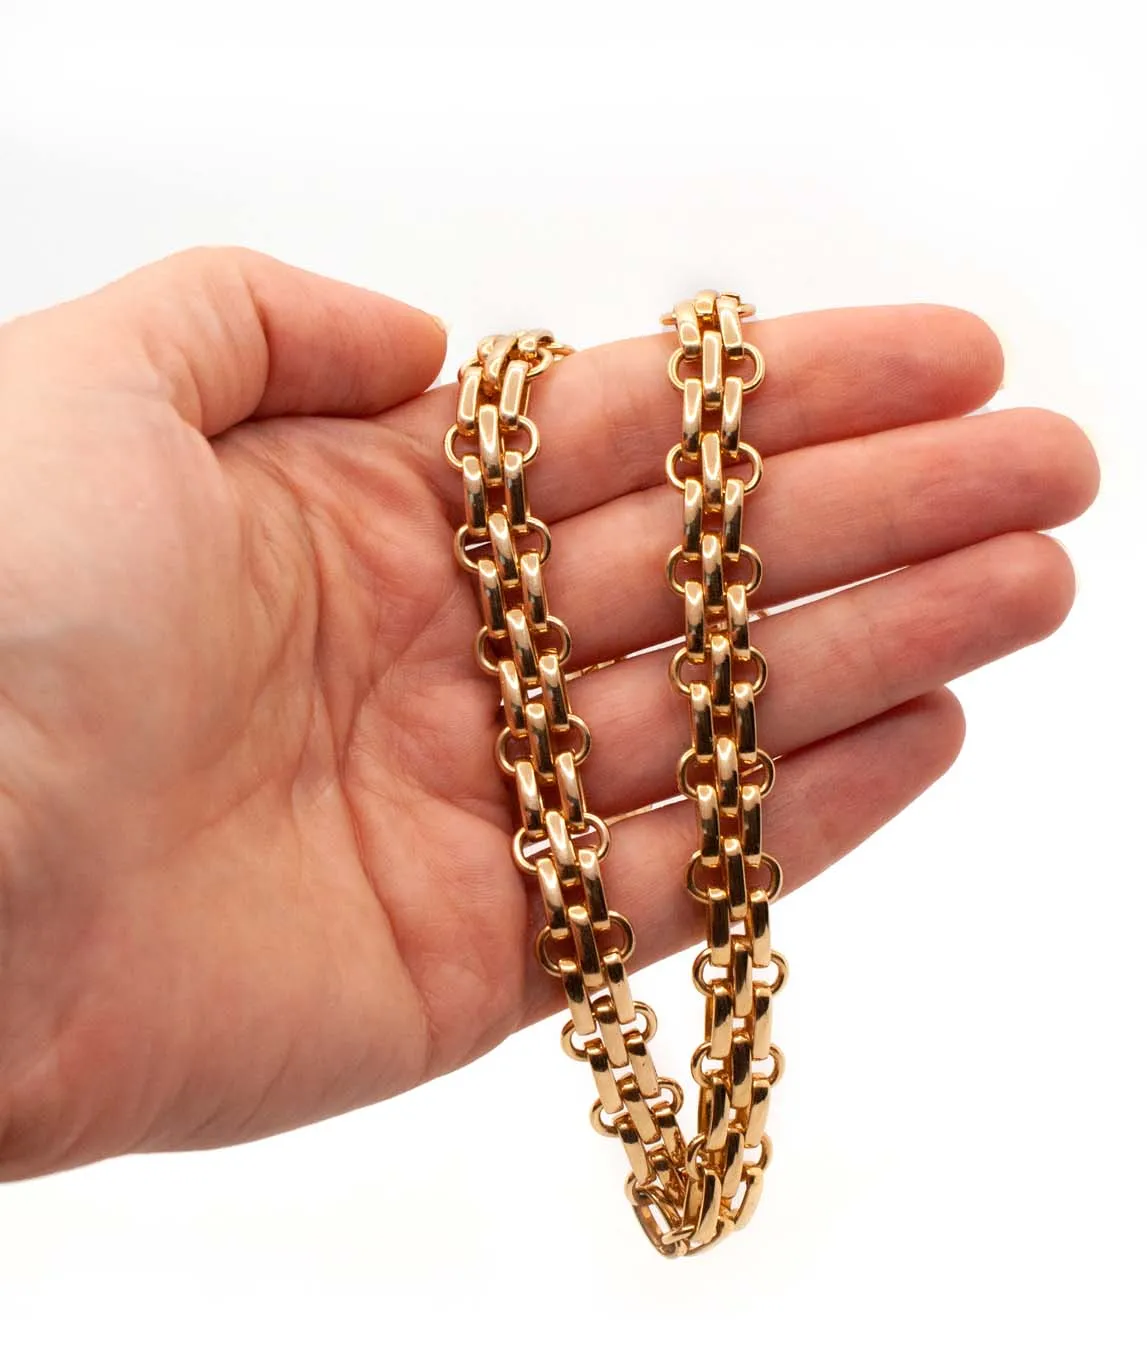 Christian Dior chunky fancy link gold plated chain necklace held in a hand